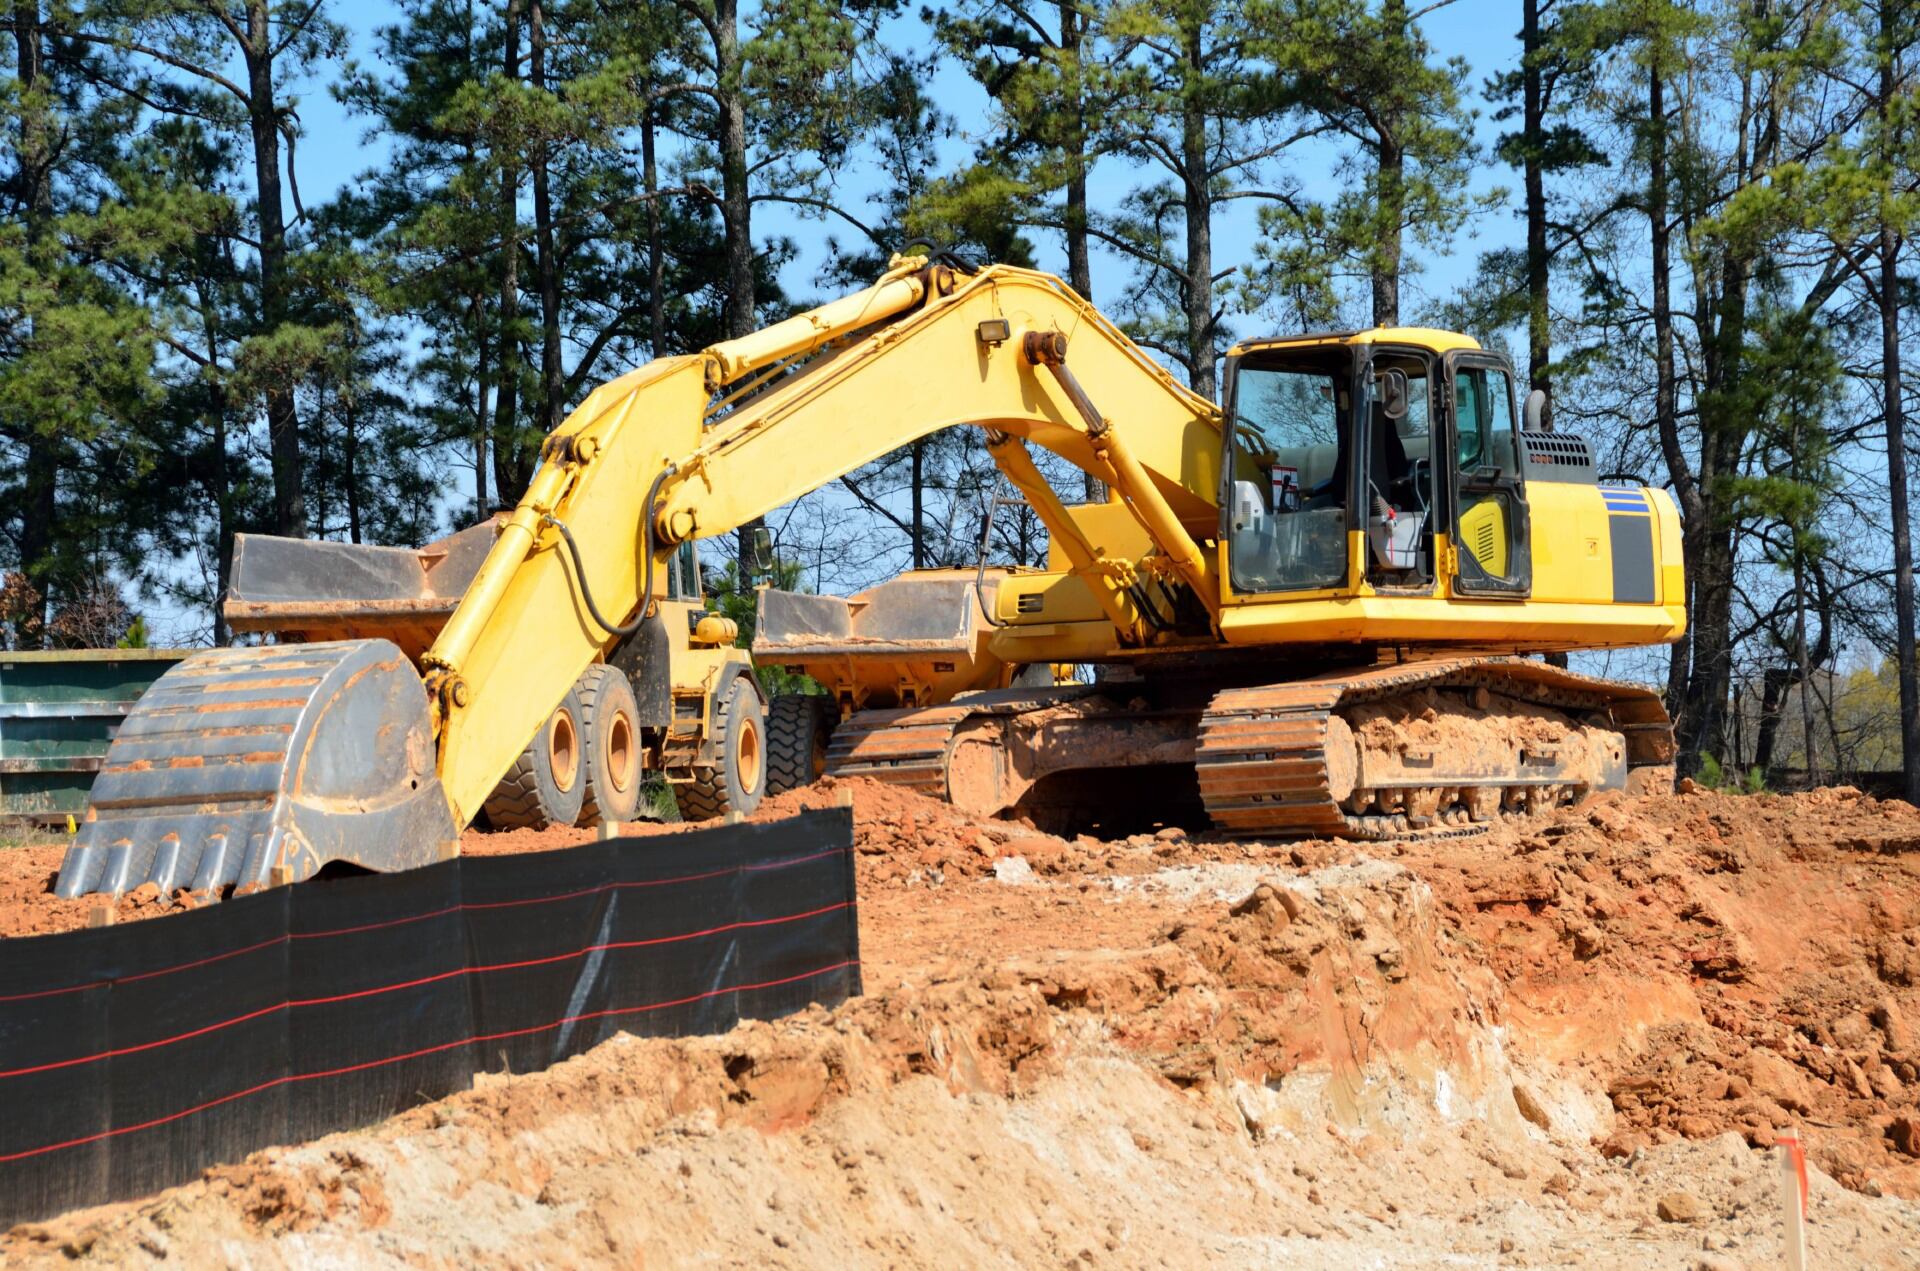 An excavator digging into the earth.